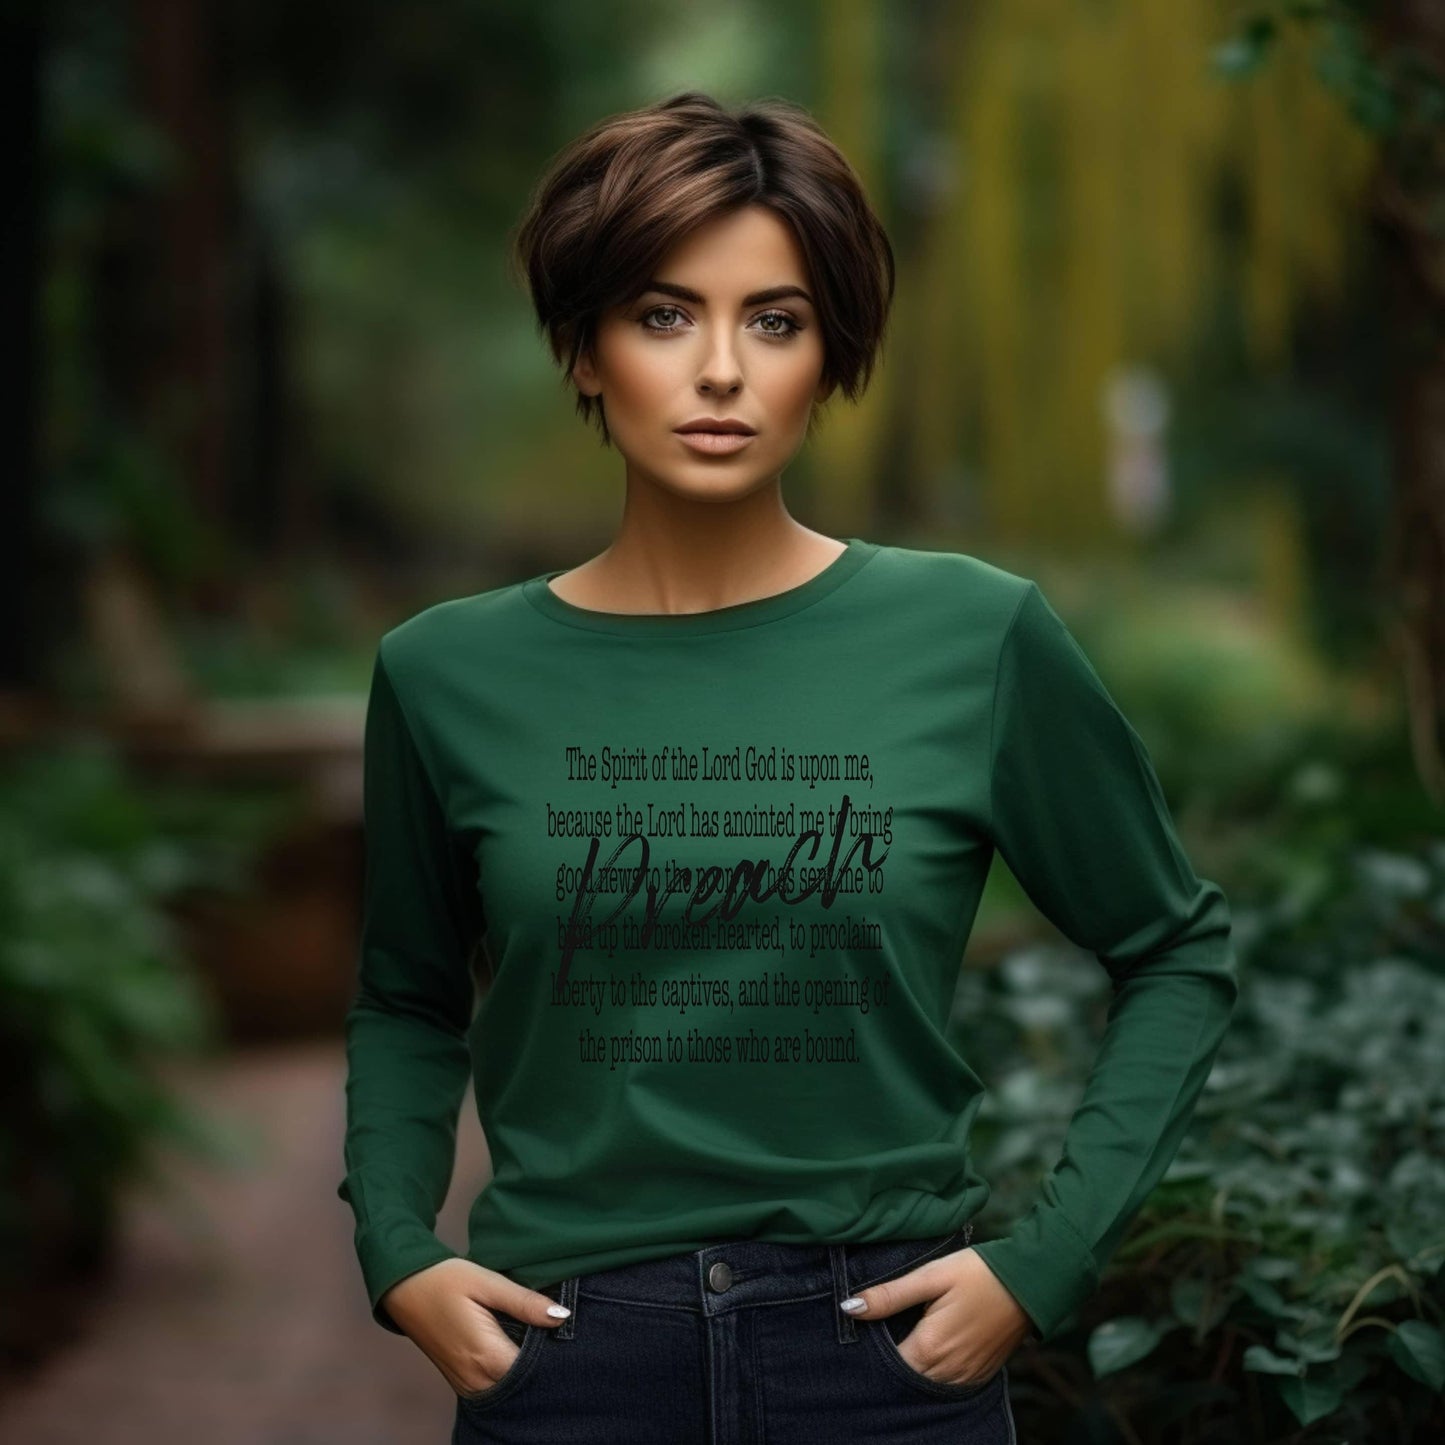 Preach The Spirit Of The Lord Is Upon Me Women’s Long Sleeve Tee - JT Footprint Apparel